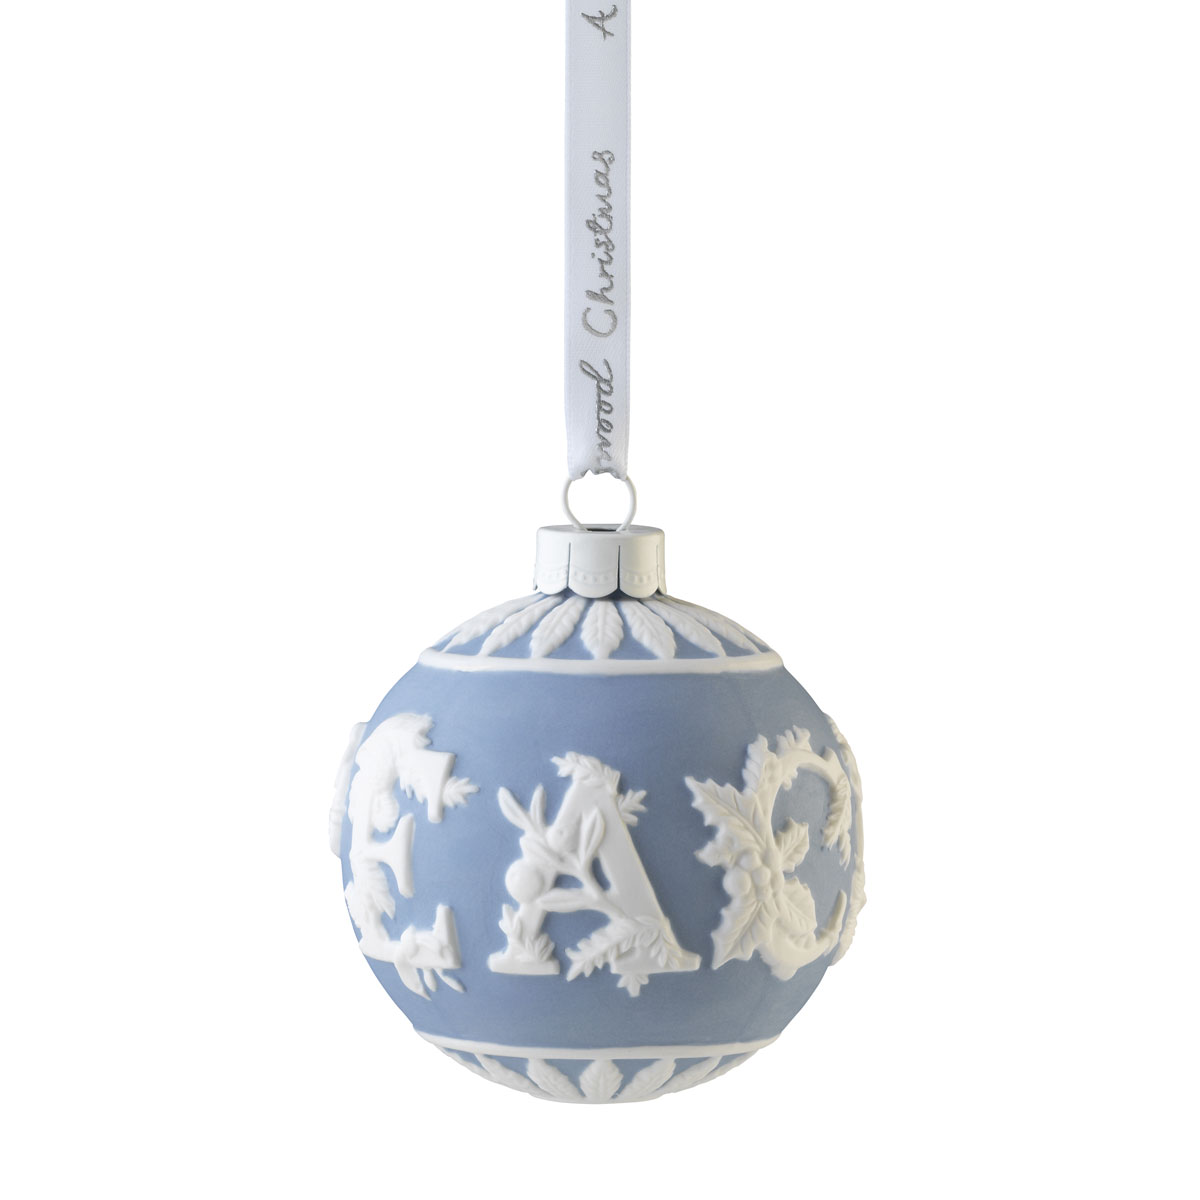 Wedgwood Peace Bauble Ball Ornament